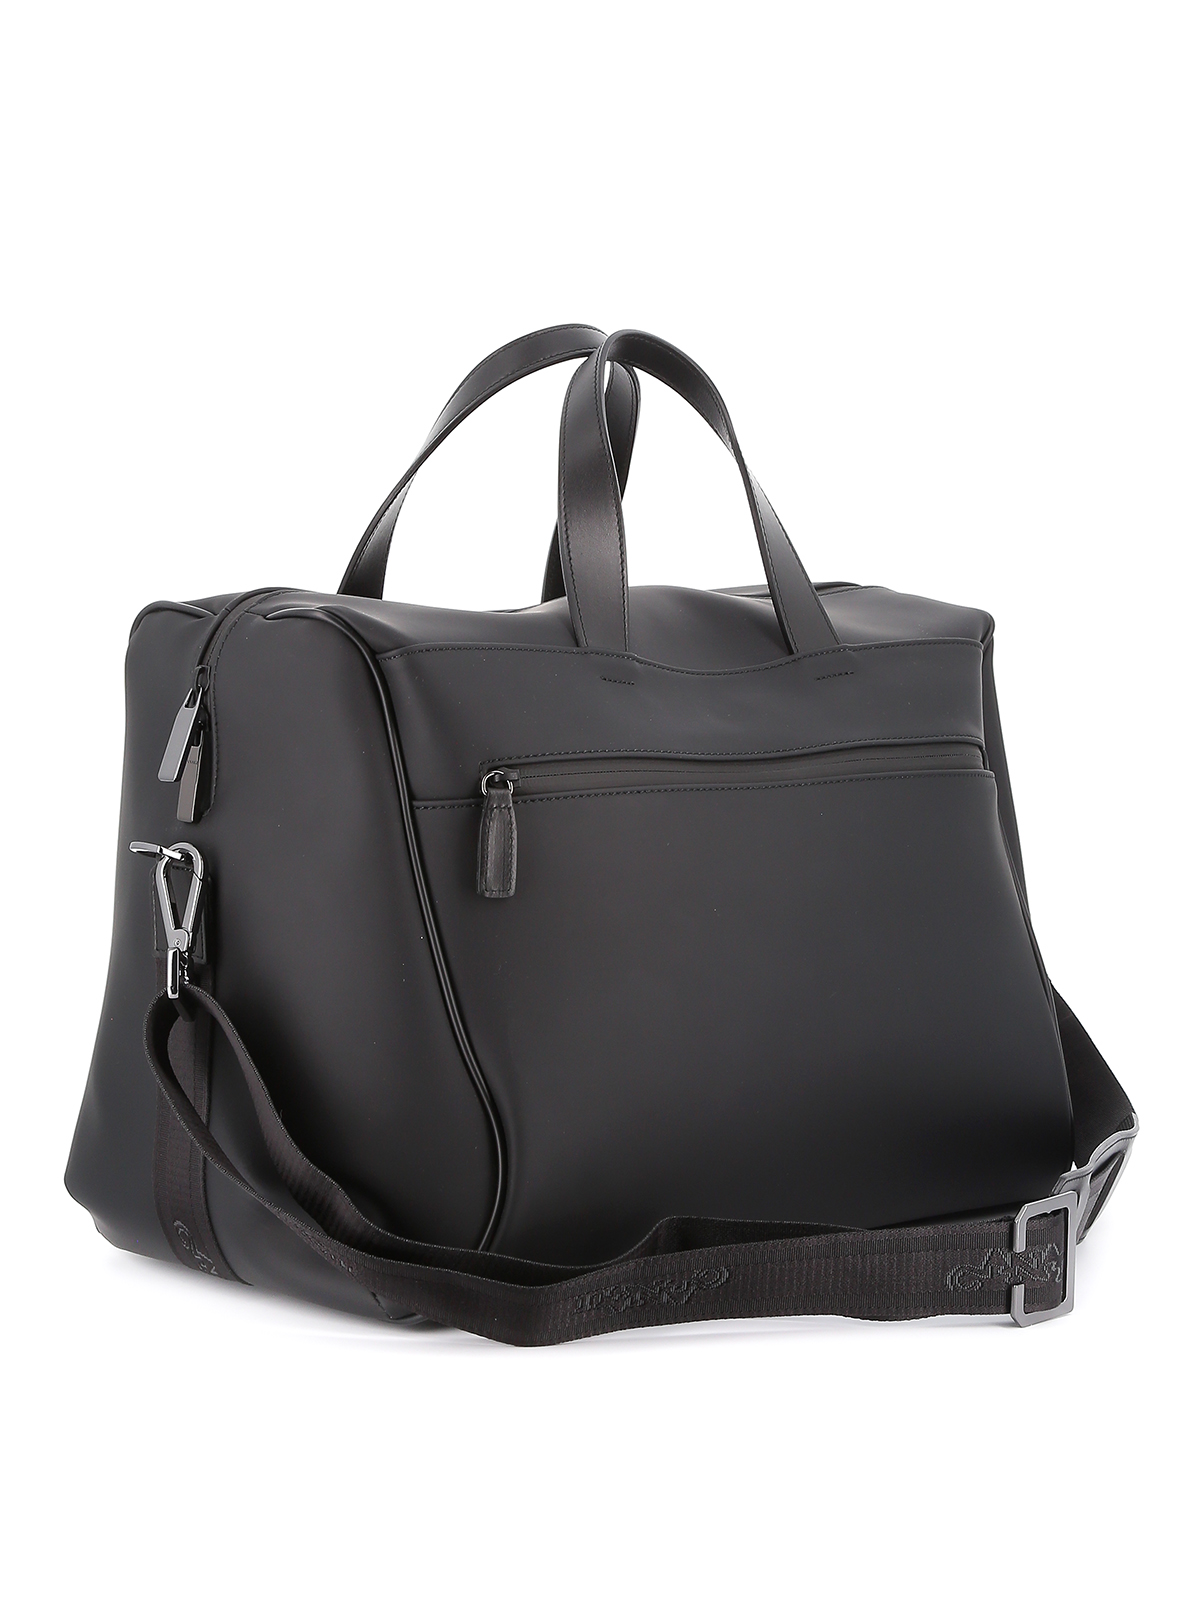 Luggage & Travel bags Canali - Rubber duffle bag - NY00089P325162110